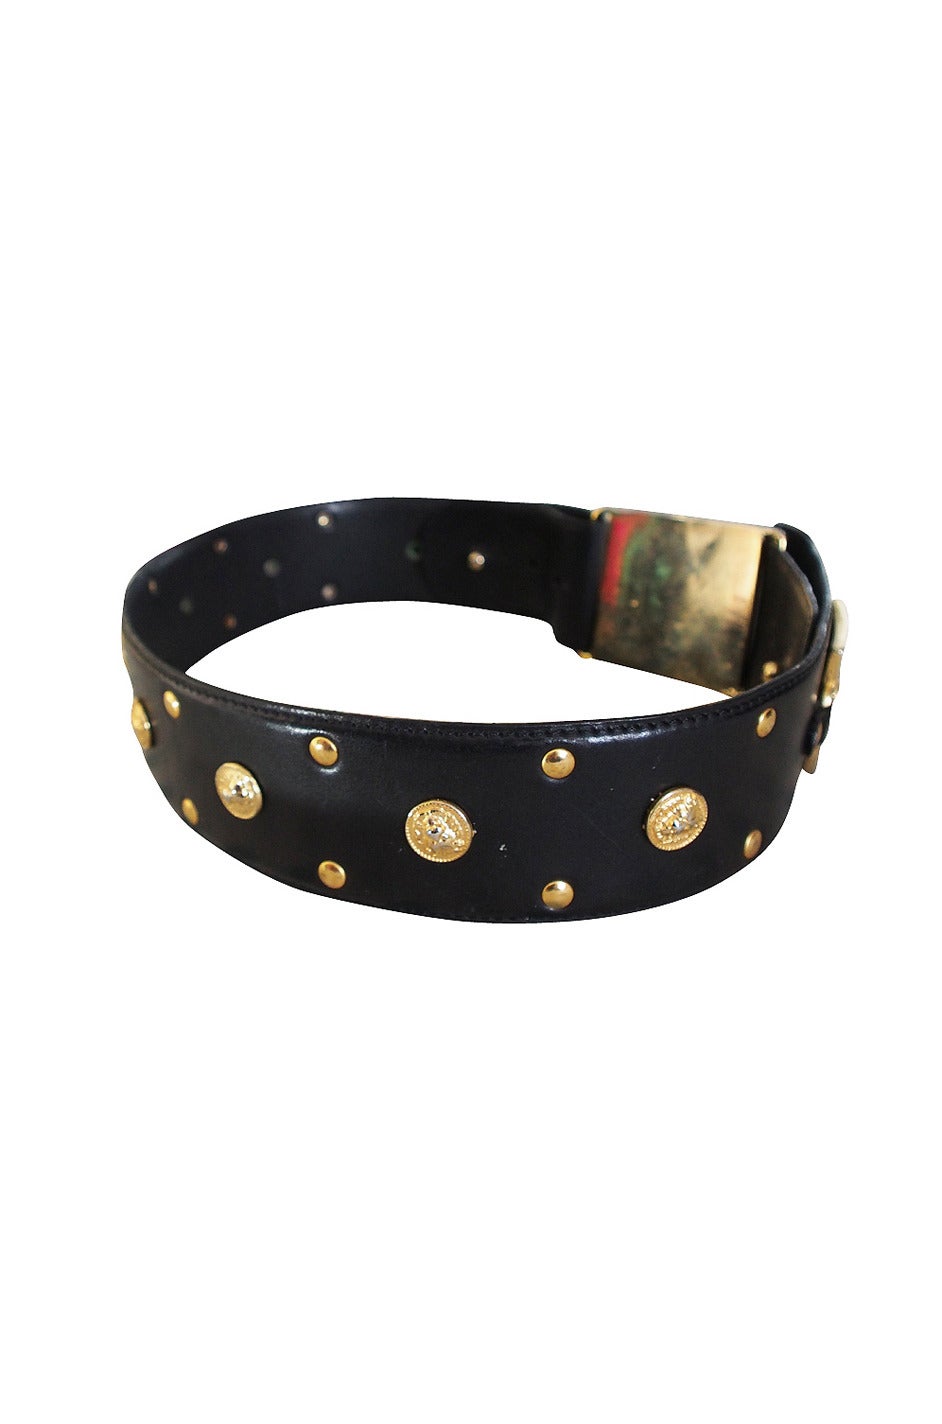 The signature Versace gold lion's head adorn the heavy gold tone metal detailing on the belt at the front and around the belt on the large studs. A classic and I love the width that really allows a cinched in, wasp waist silhouette.

Stamped a